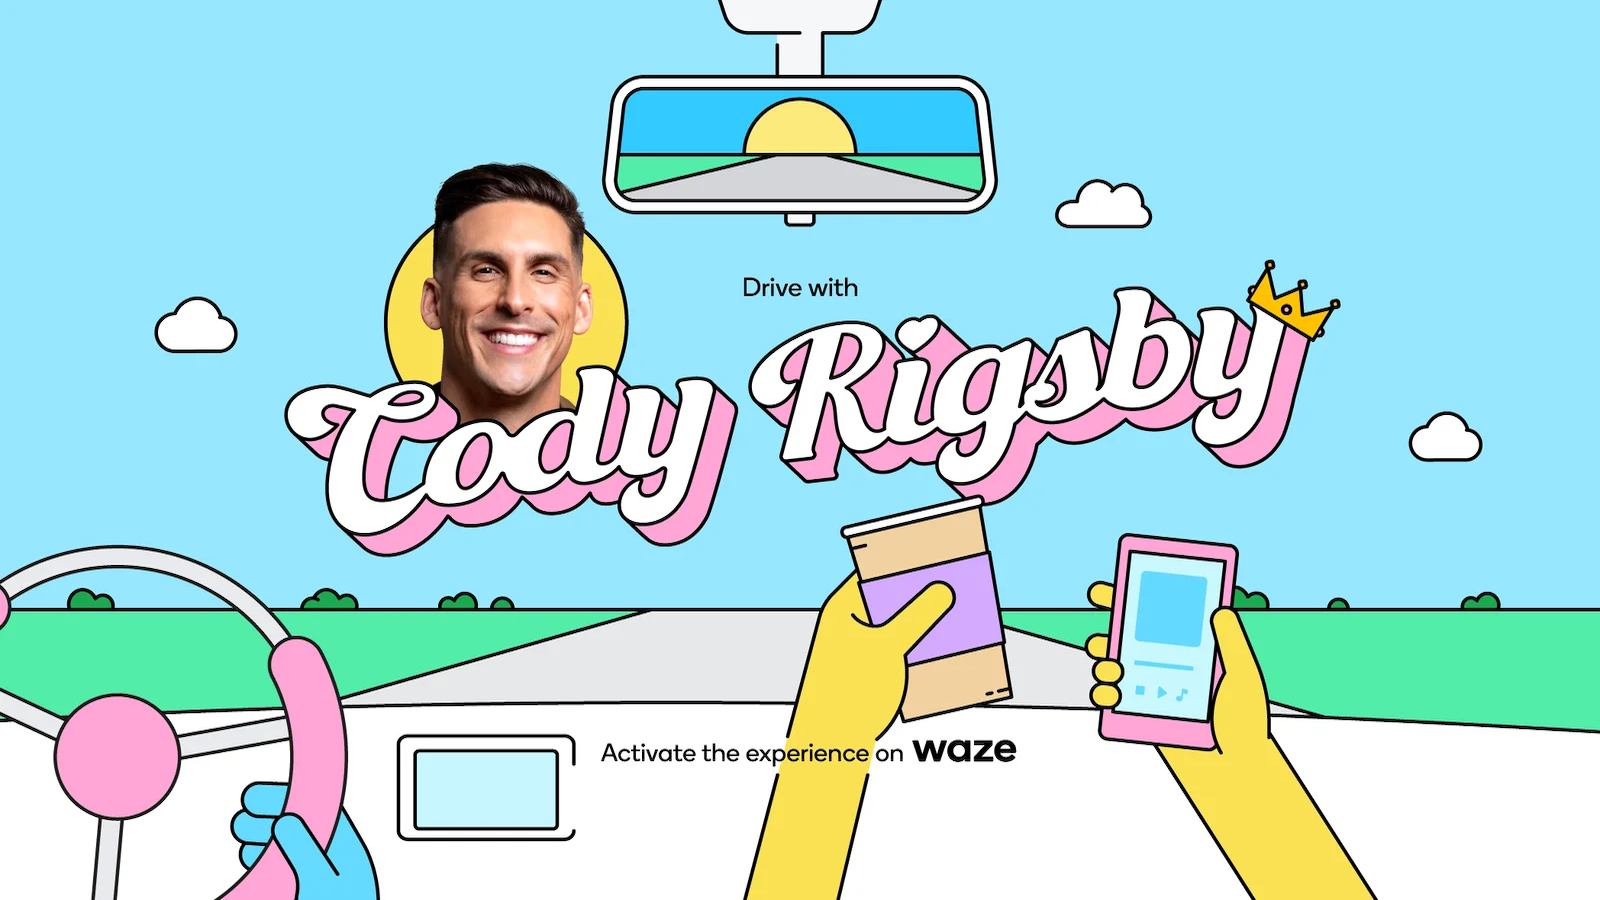 Cartoon style image of a person driving with Cody Rigsby's name and likeness shown.